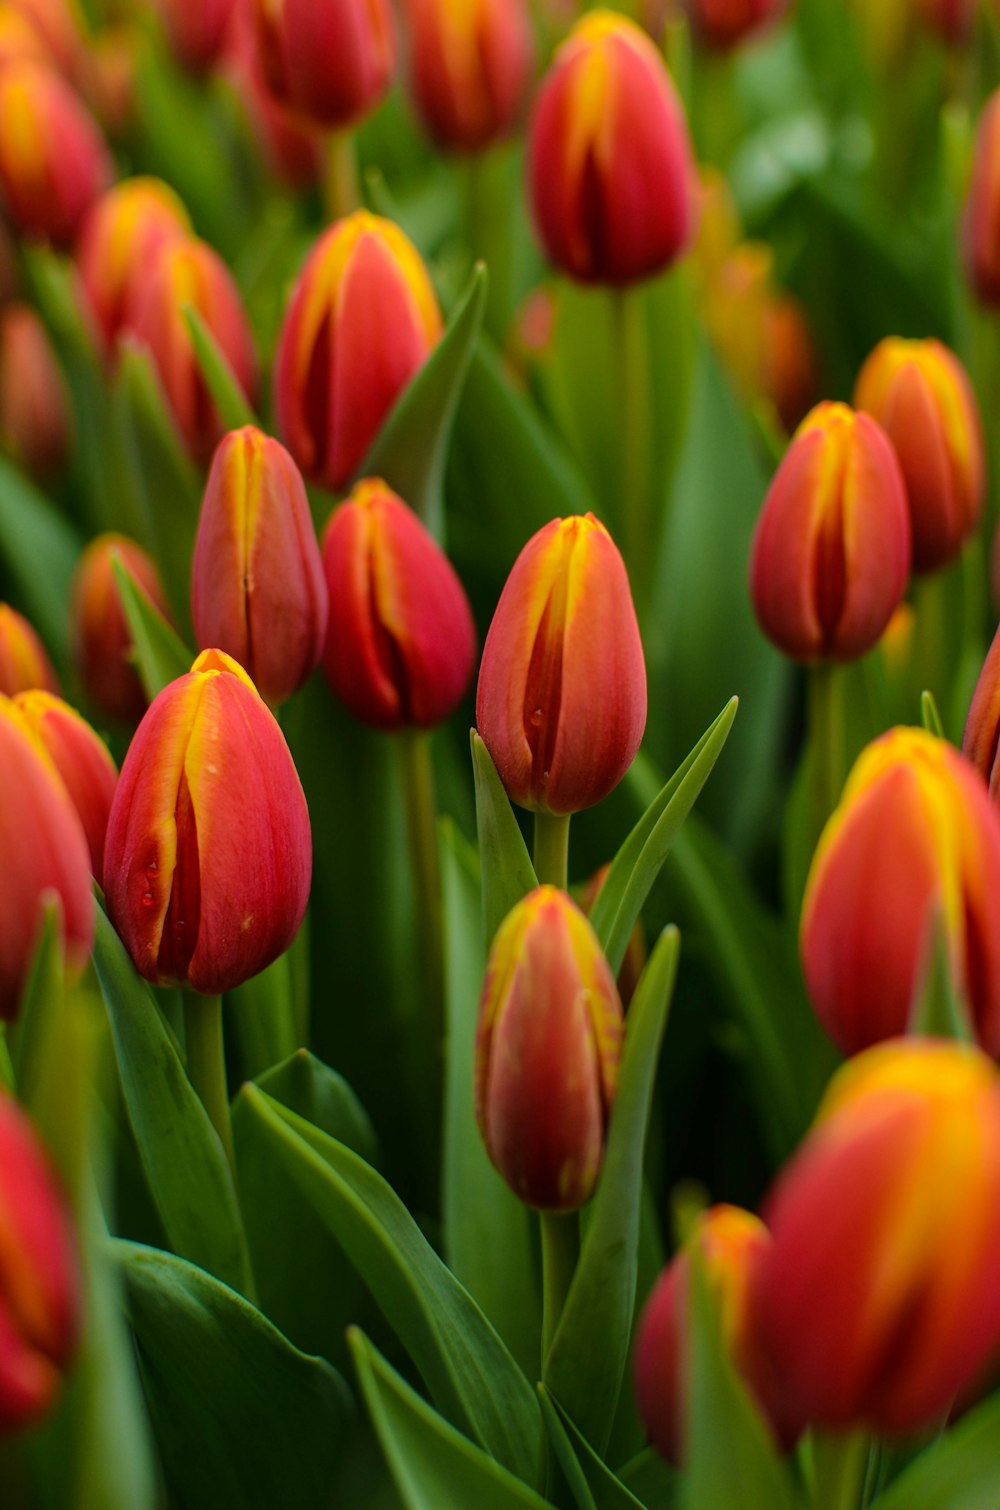 a bunch of red and yellow tulips with green leaves